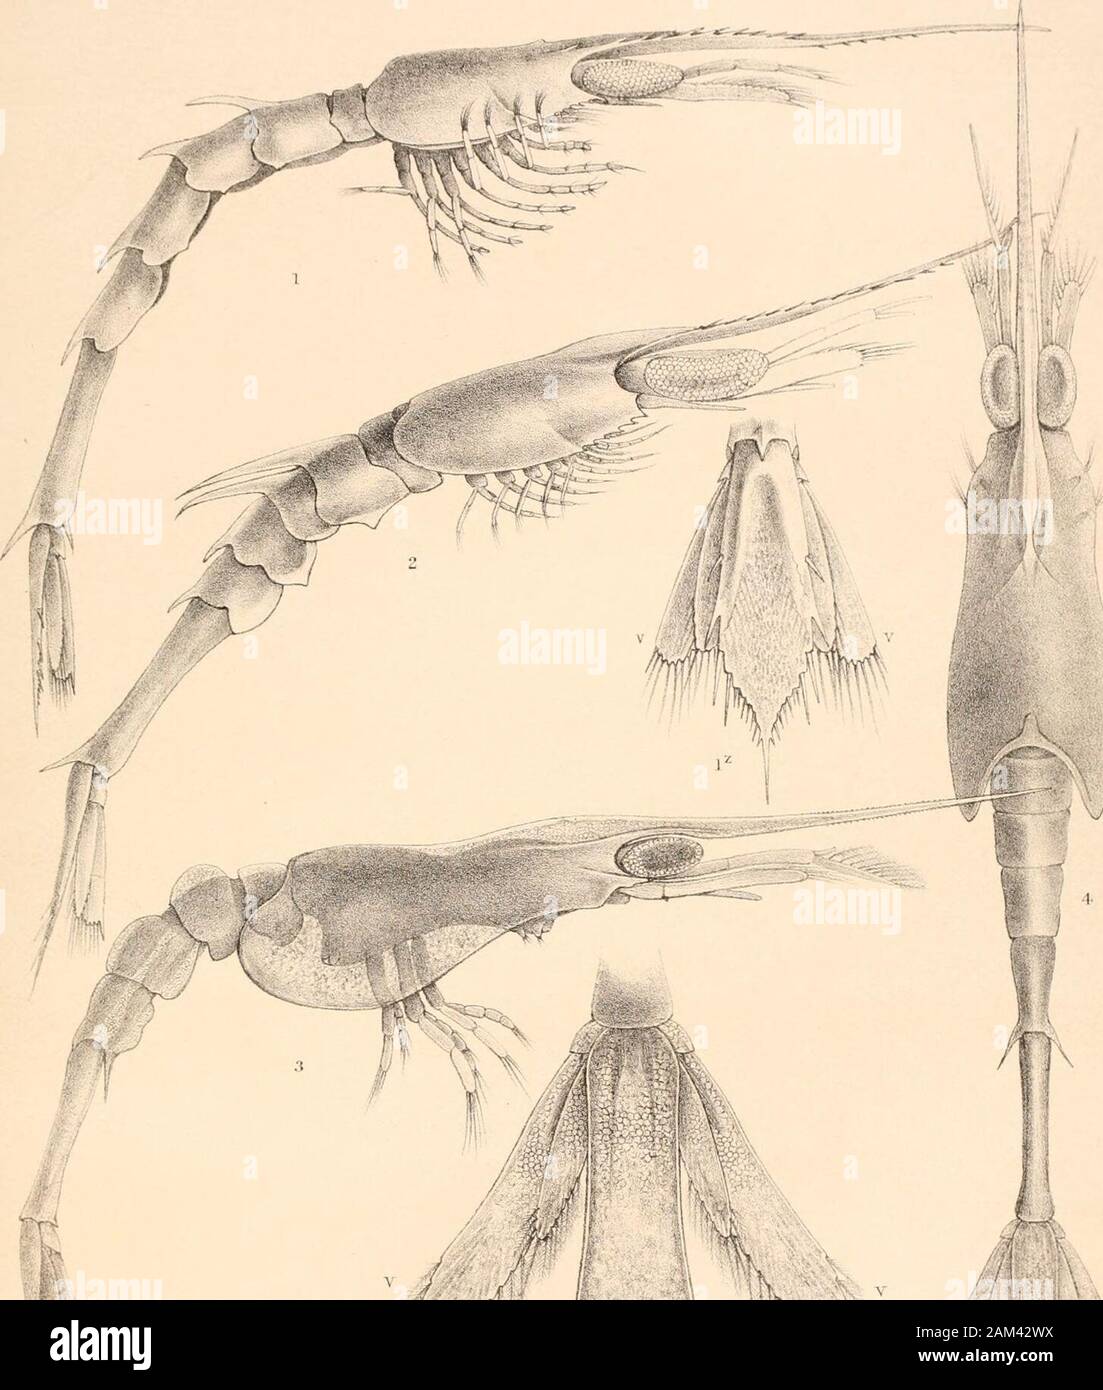 Report on the scientific results of the voyage of H.M.SChallenger during the years 1873-76 : under the command of Captain George SNares, R.N., F.R.Sand Captain Frank Turle Thomson, R.N. . I . OODEOPUS GEMINIDENTATUS . 3.OODEOPUS SERRATUS.vu2. D° SERRATUS . 4. D° ARIY1ATUS. 5 OODEOPUS LONGISPINUS . PLATE CXLTII. (ZOOL. CHALL. EXP—PART LII.—1888.)—Fff. PLATE CXLIII. Oodeopus intermedins (p. 879).Fig. 1. Lateral view ; enlarged twenty times.,, lv.z.v. Rhipidura. Oodeopus duplex (p. 880). „ 2. Lateral view ; enlarged twenty times. Oodeopus gibbosus (p. 882).,, 3. Lateral view ; enlarged twenty-two Stock Photo